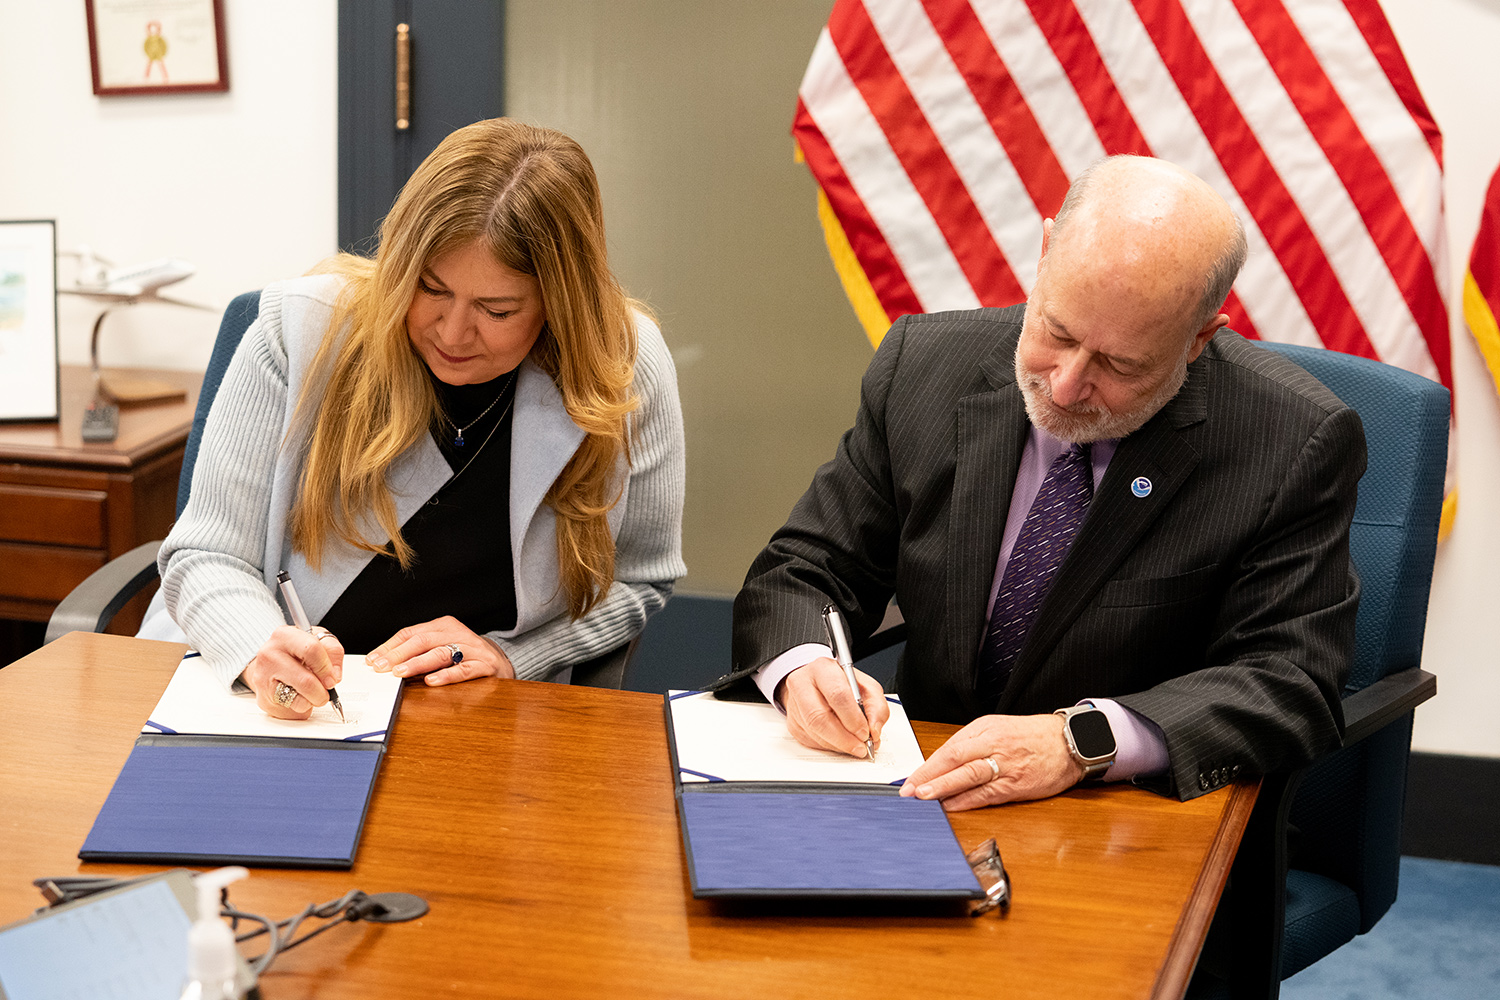 Kathi Vidal, Under Secretary of Commerce for Intellectual Property and Director of the United States Patent and Trademark Office (USPTO) and Richard W. Spinrad, Ph.D., Under Secretary of Commerce for Oceans and Atmosphere and NOAA Administrator sign a memorandum of understanding (MOU) to advance climate technology.